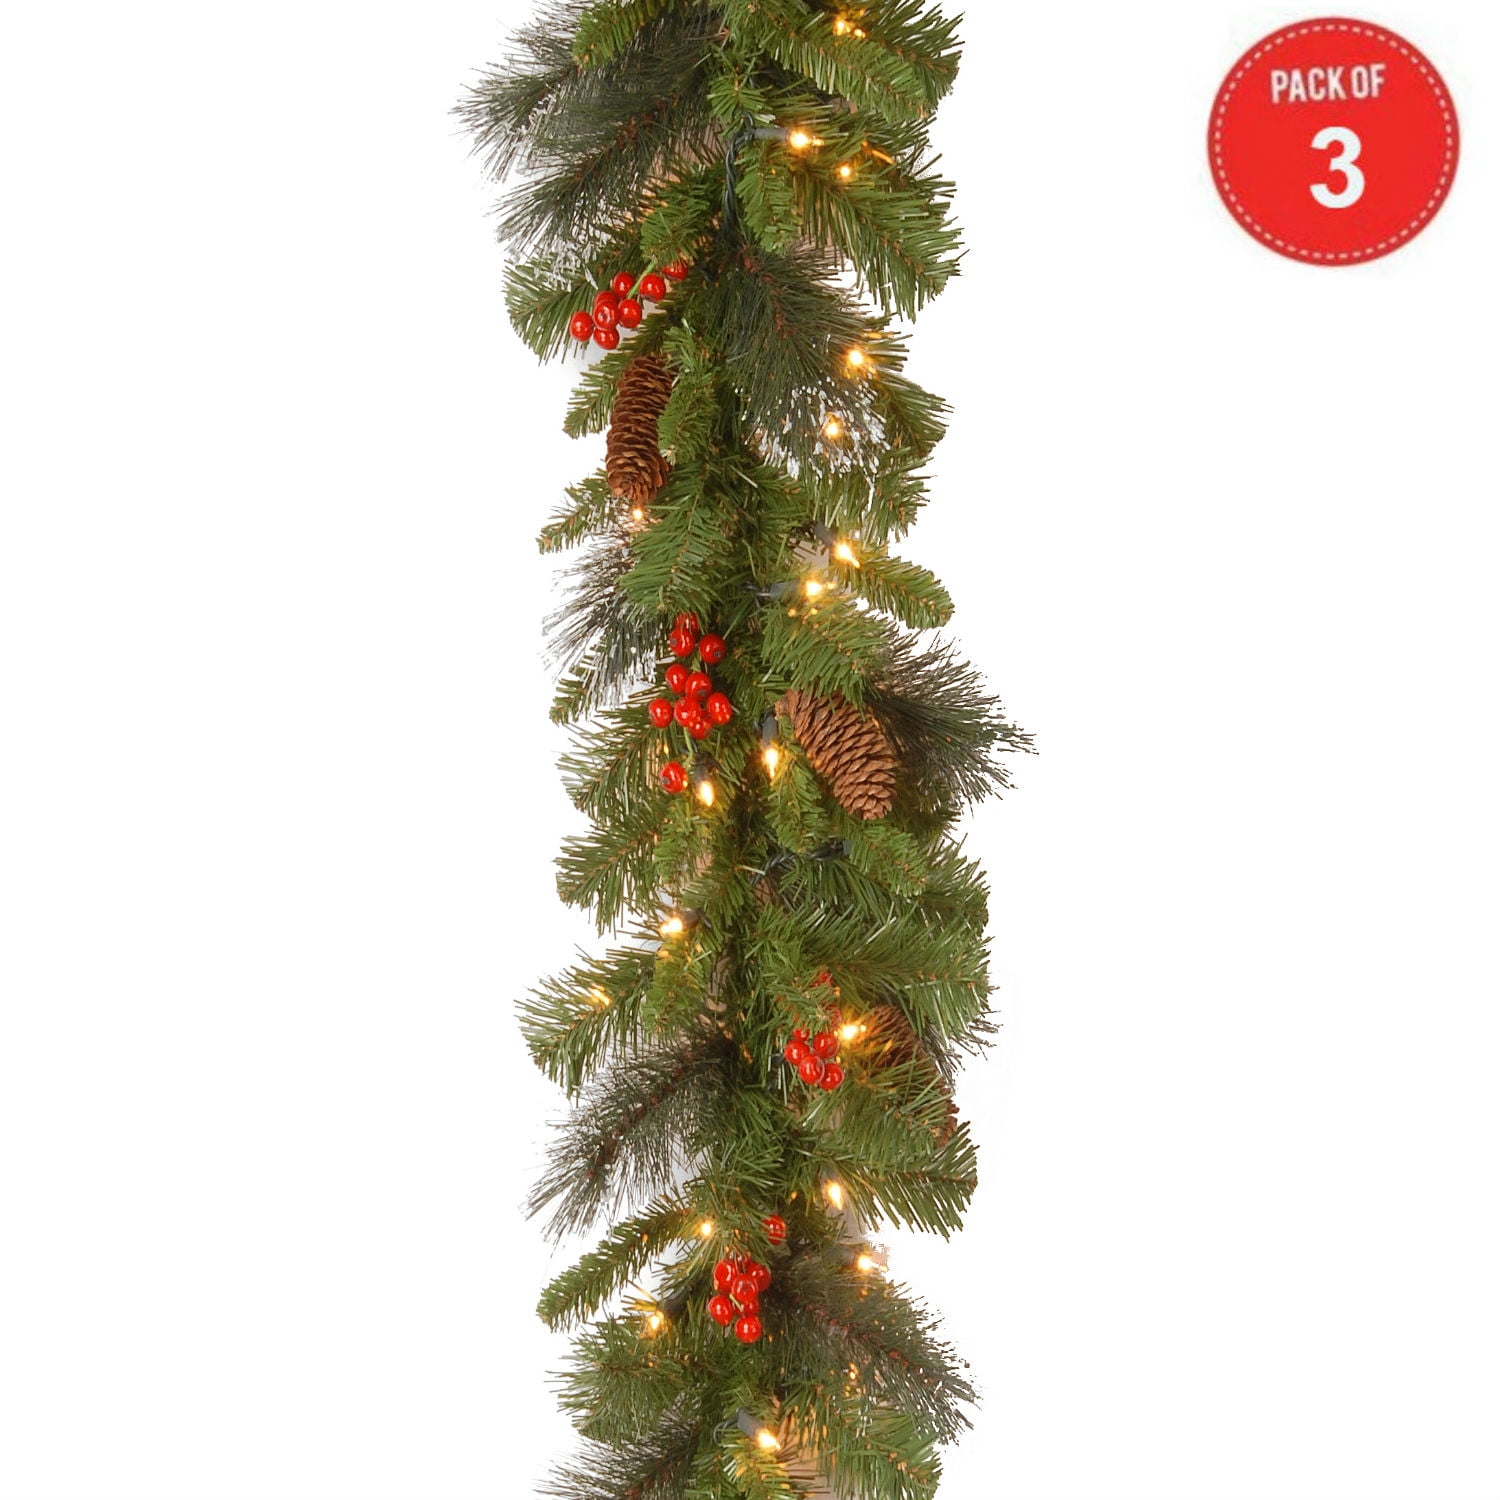 Crestwood Spruce Wreath with Silver Bristle Red Berries 35 lights 20 in Cones 